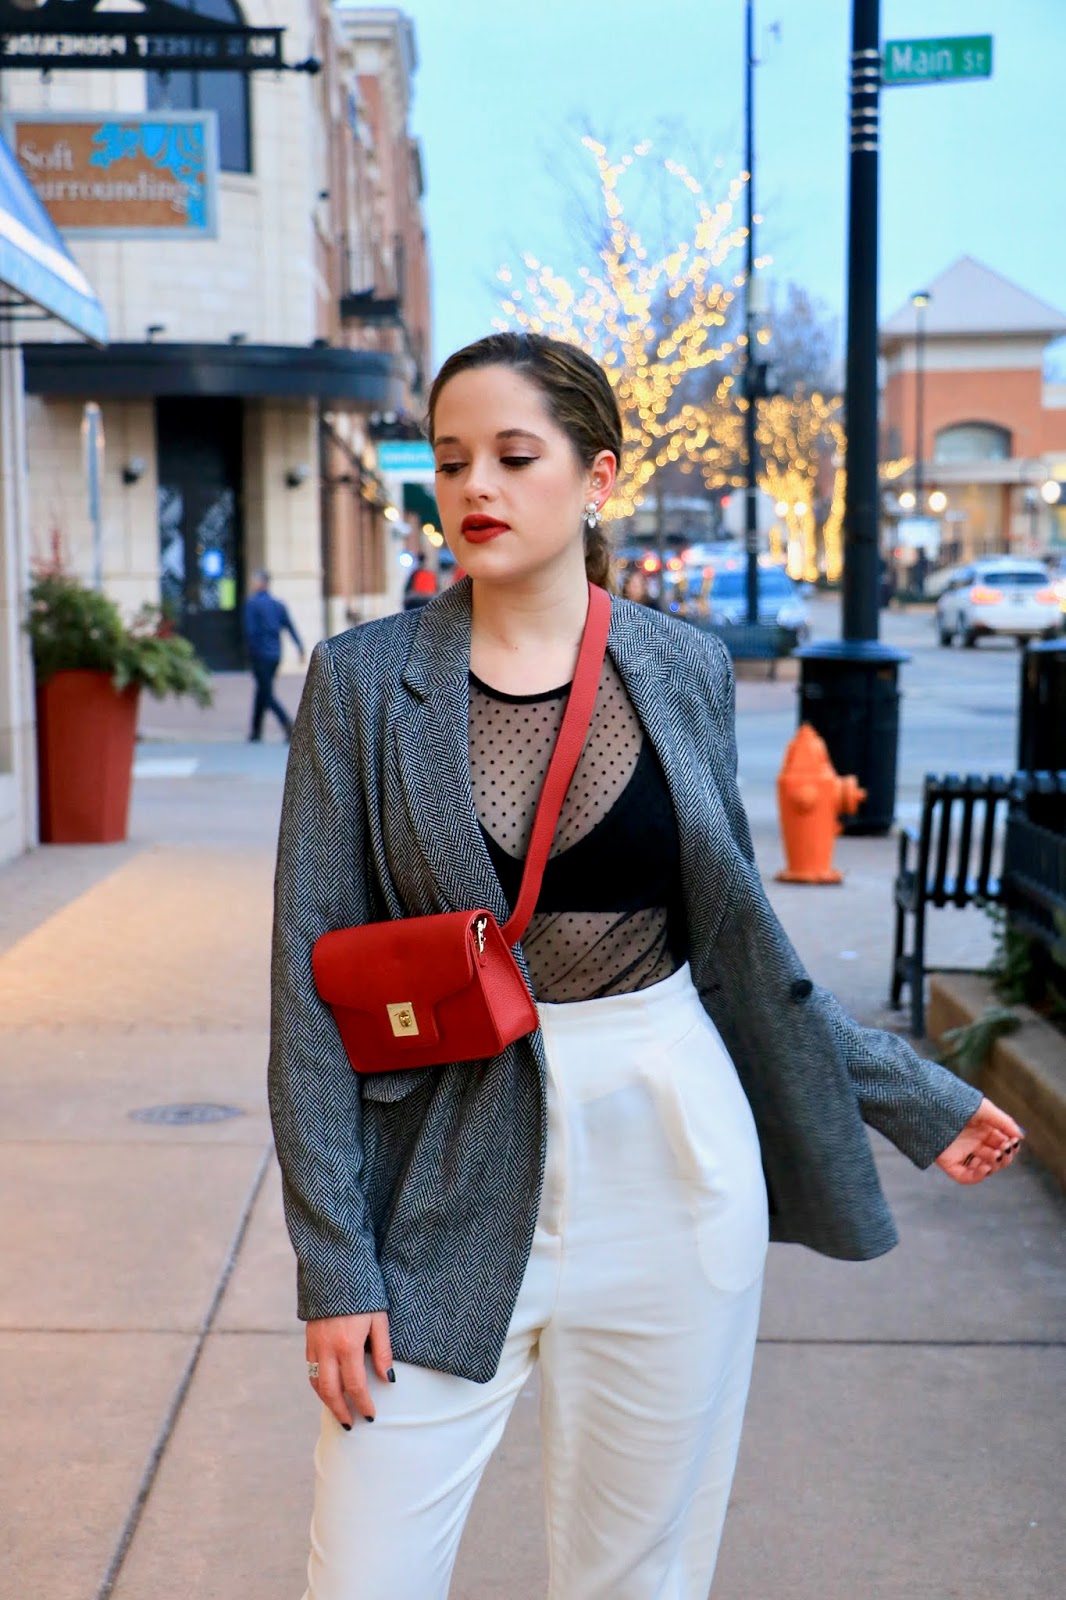 Nyc fashion blogger Kathleen Harper wearing the biggest fashion trends of 2020.